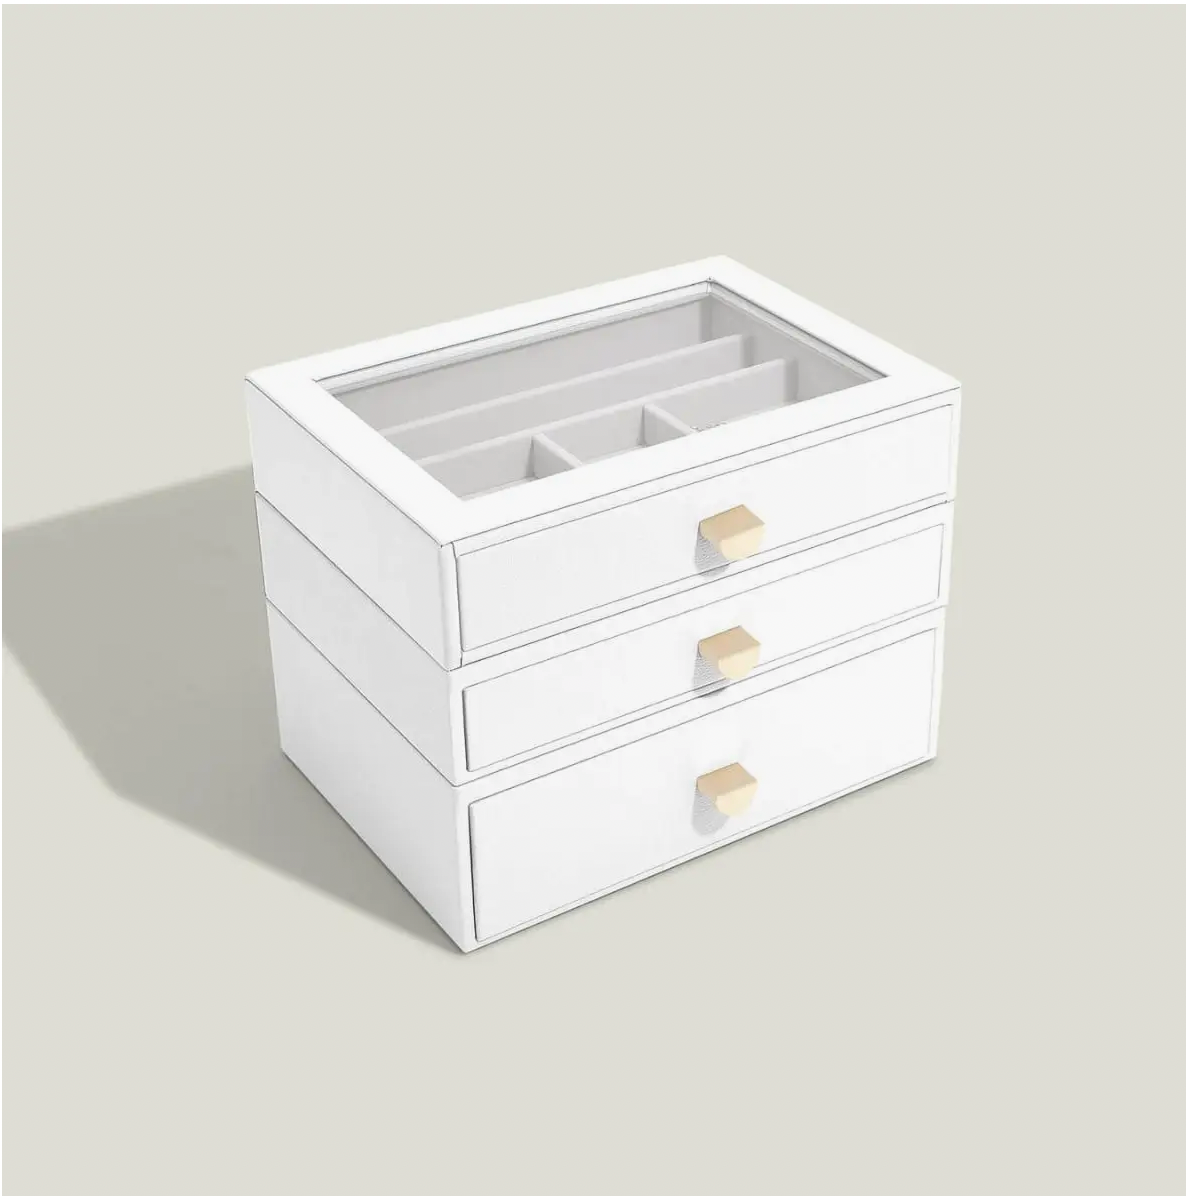 Pebble White Classic Jewellery Box set of 3 (with drawers)